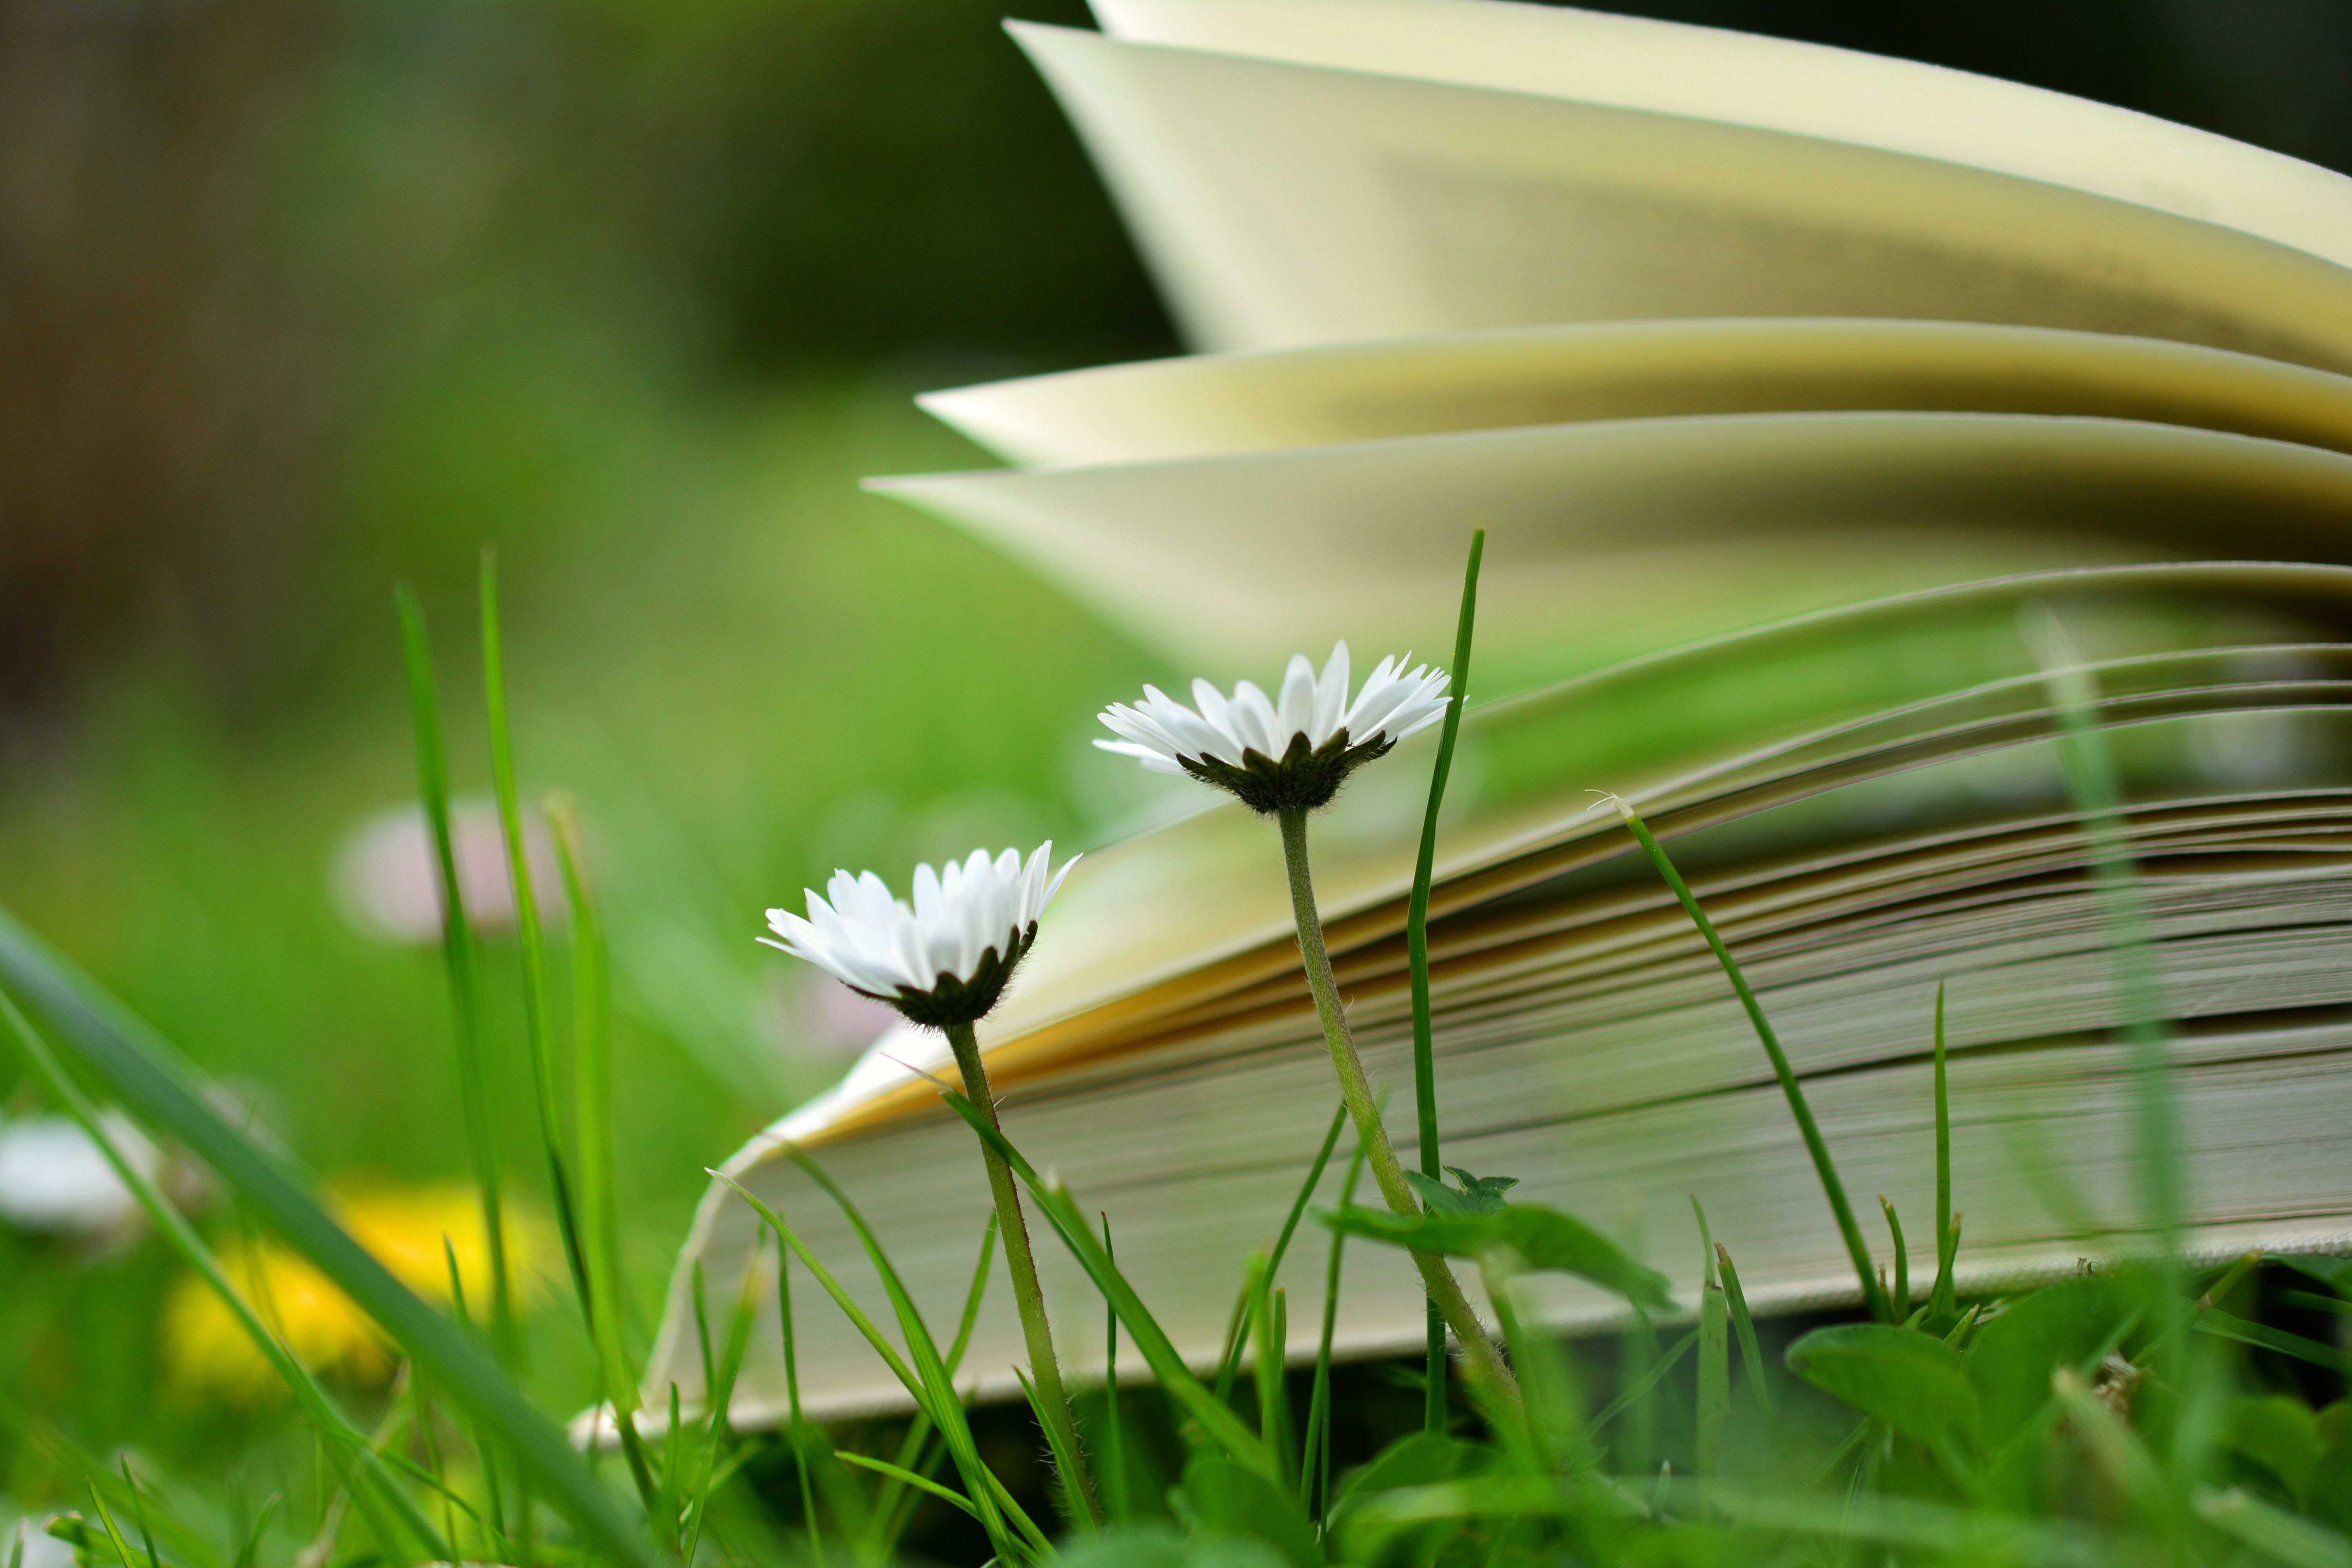 One side an open book in a meadow. Daisy flowers are in the foreground in front of the book leaves.